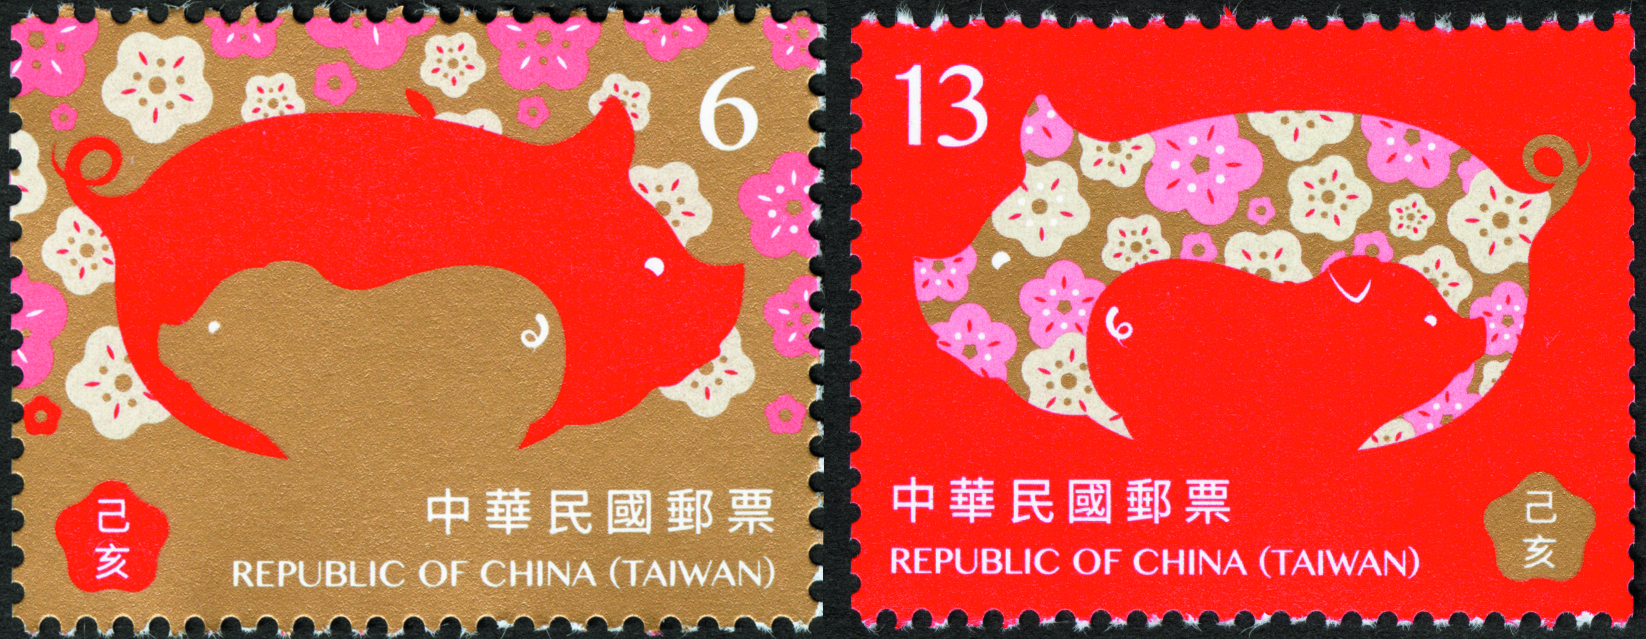 New Year’s Greeting Postage Stamps (Issue of 2018)